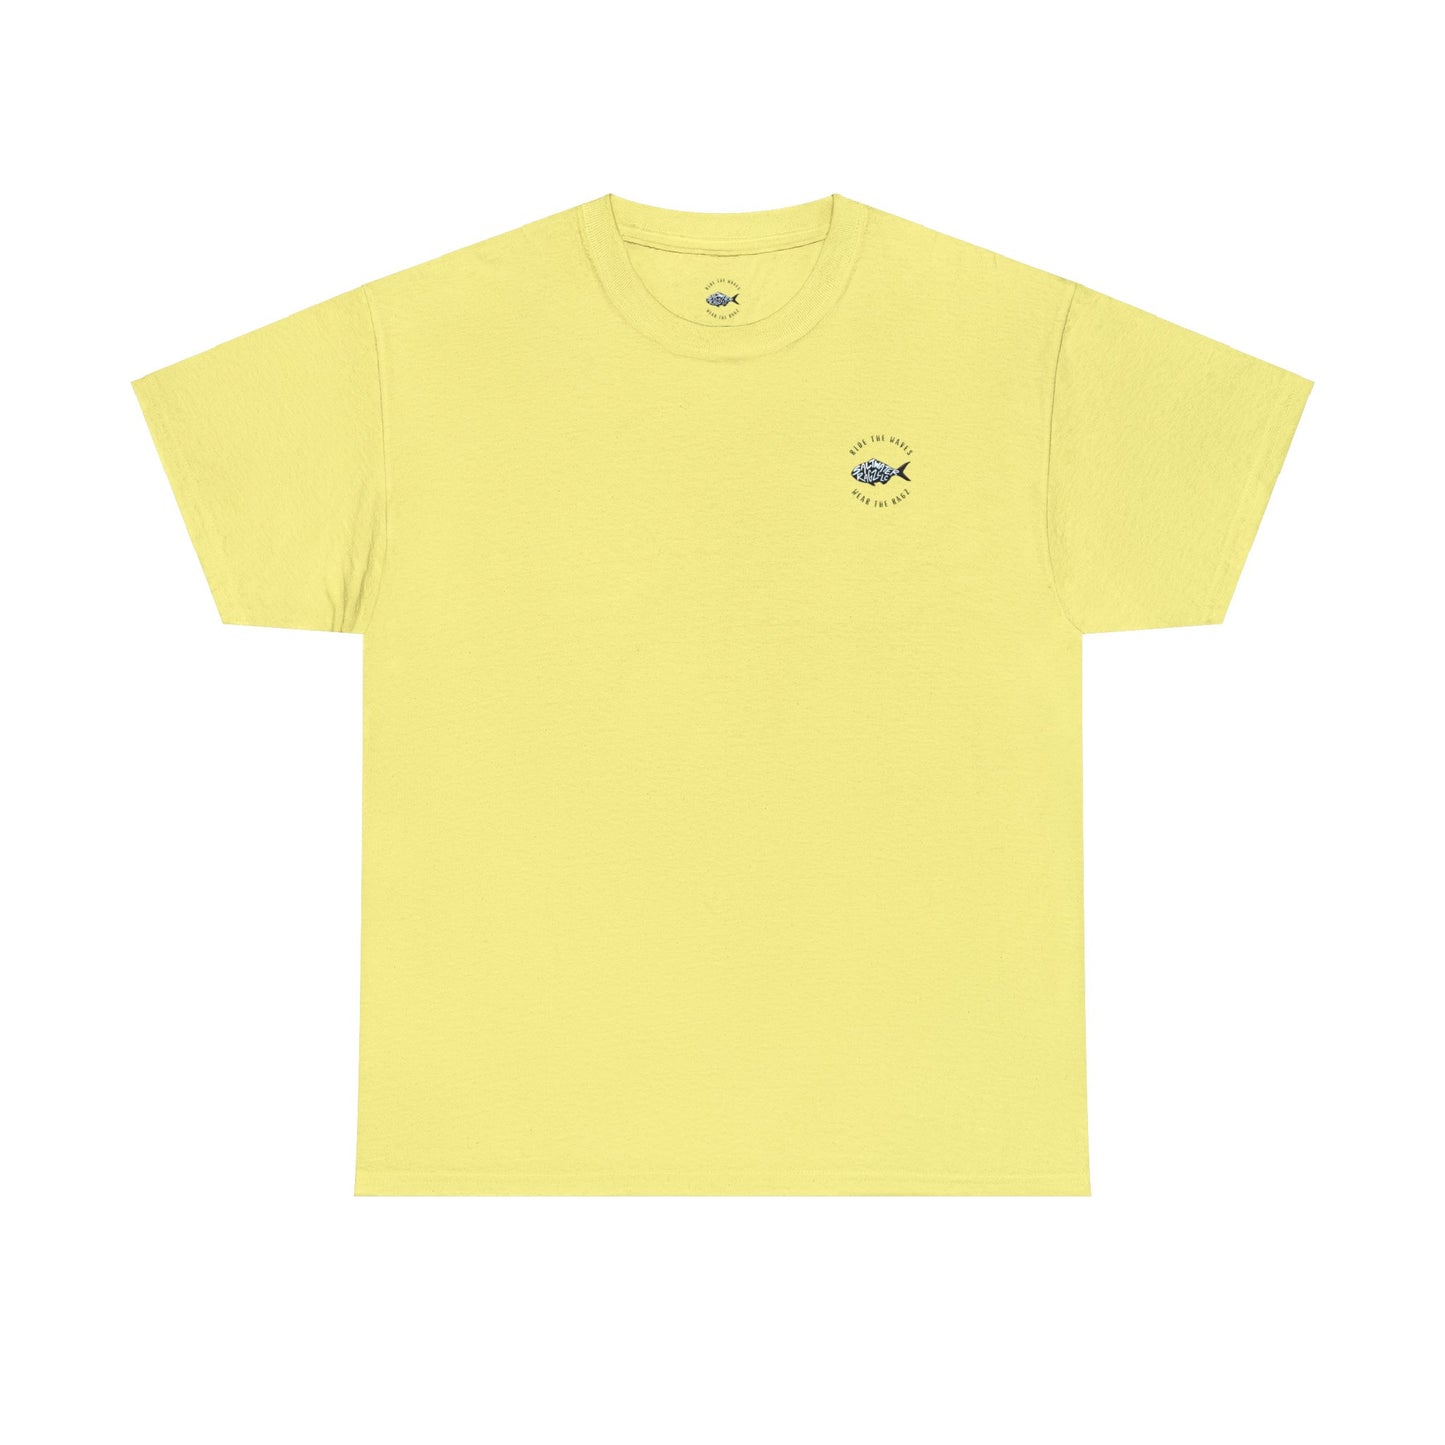 Golf "One Hole Out" Tee